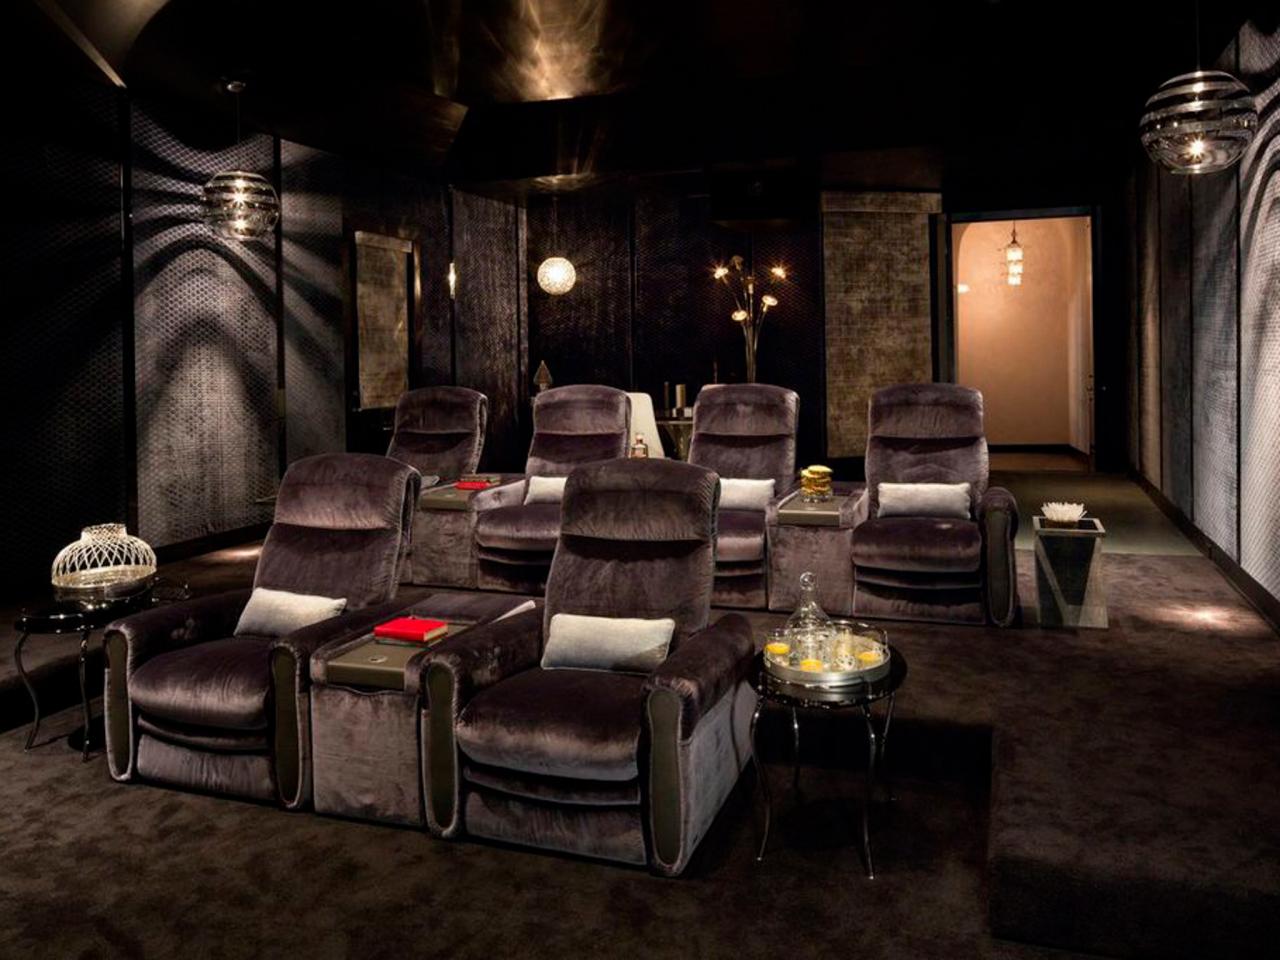 Home Theater Decor: Pictures, Options, Tips & Ideas | HGTV